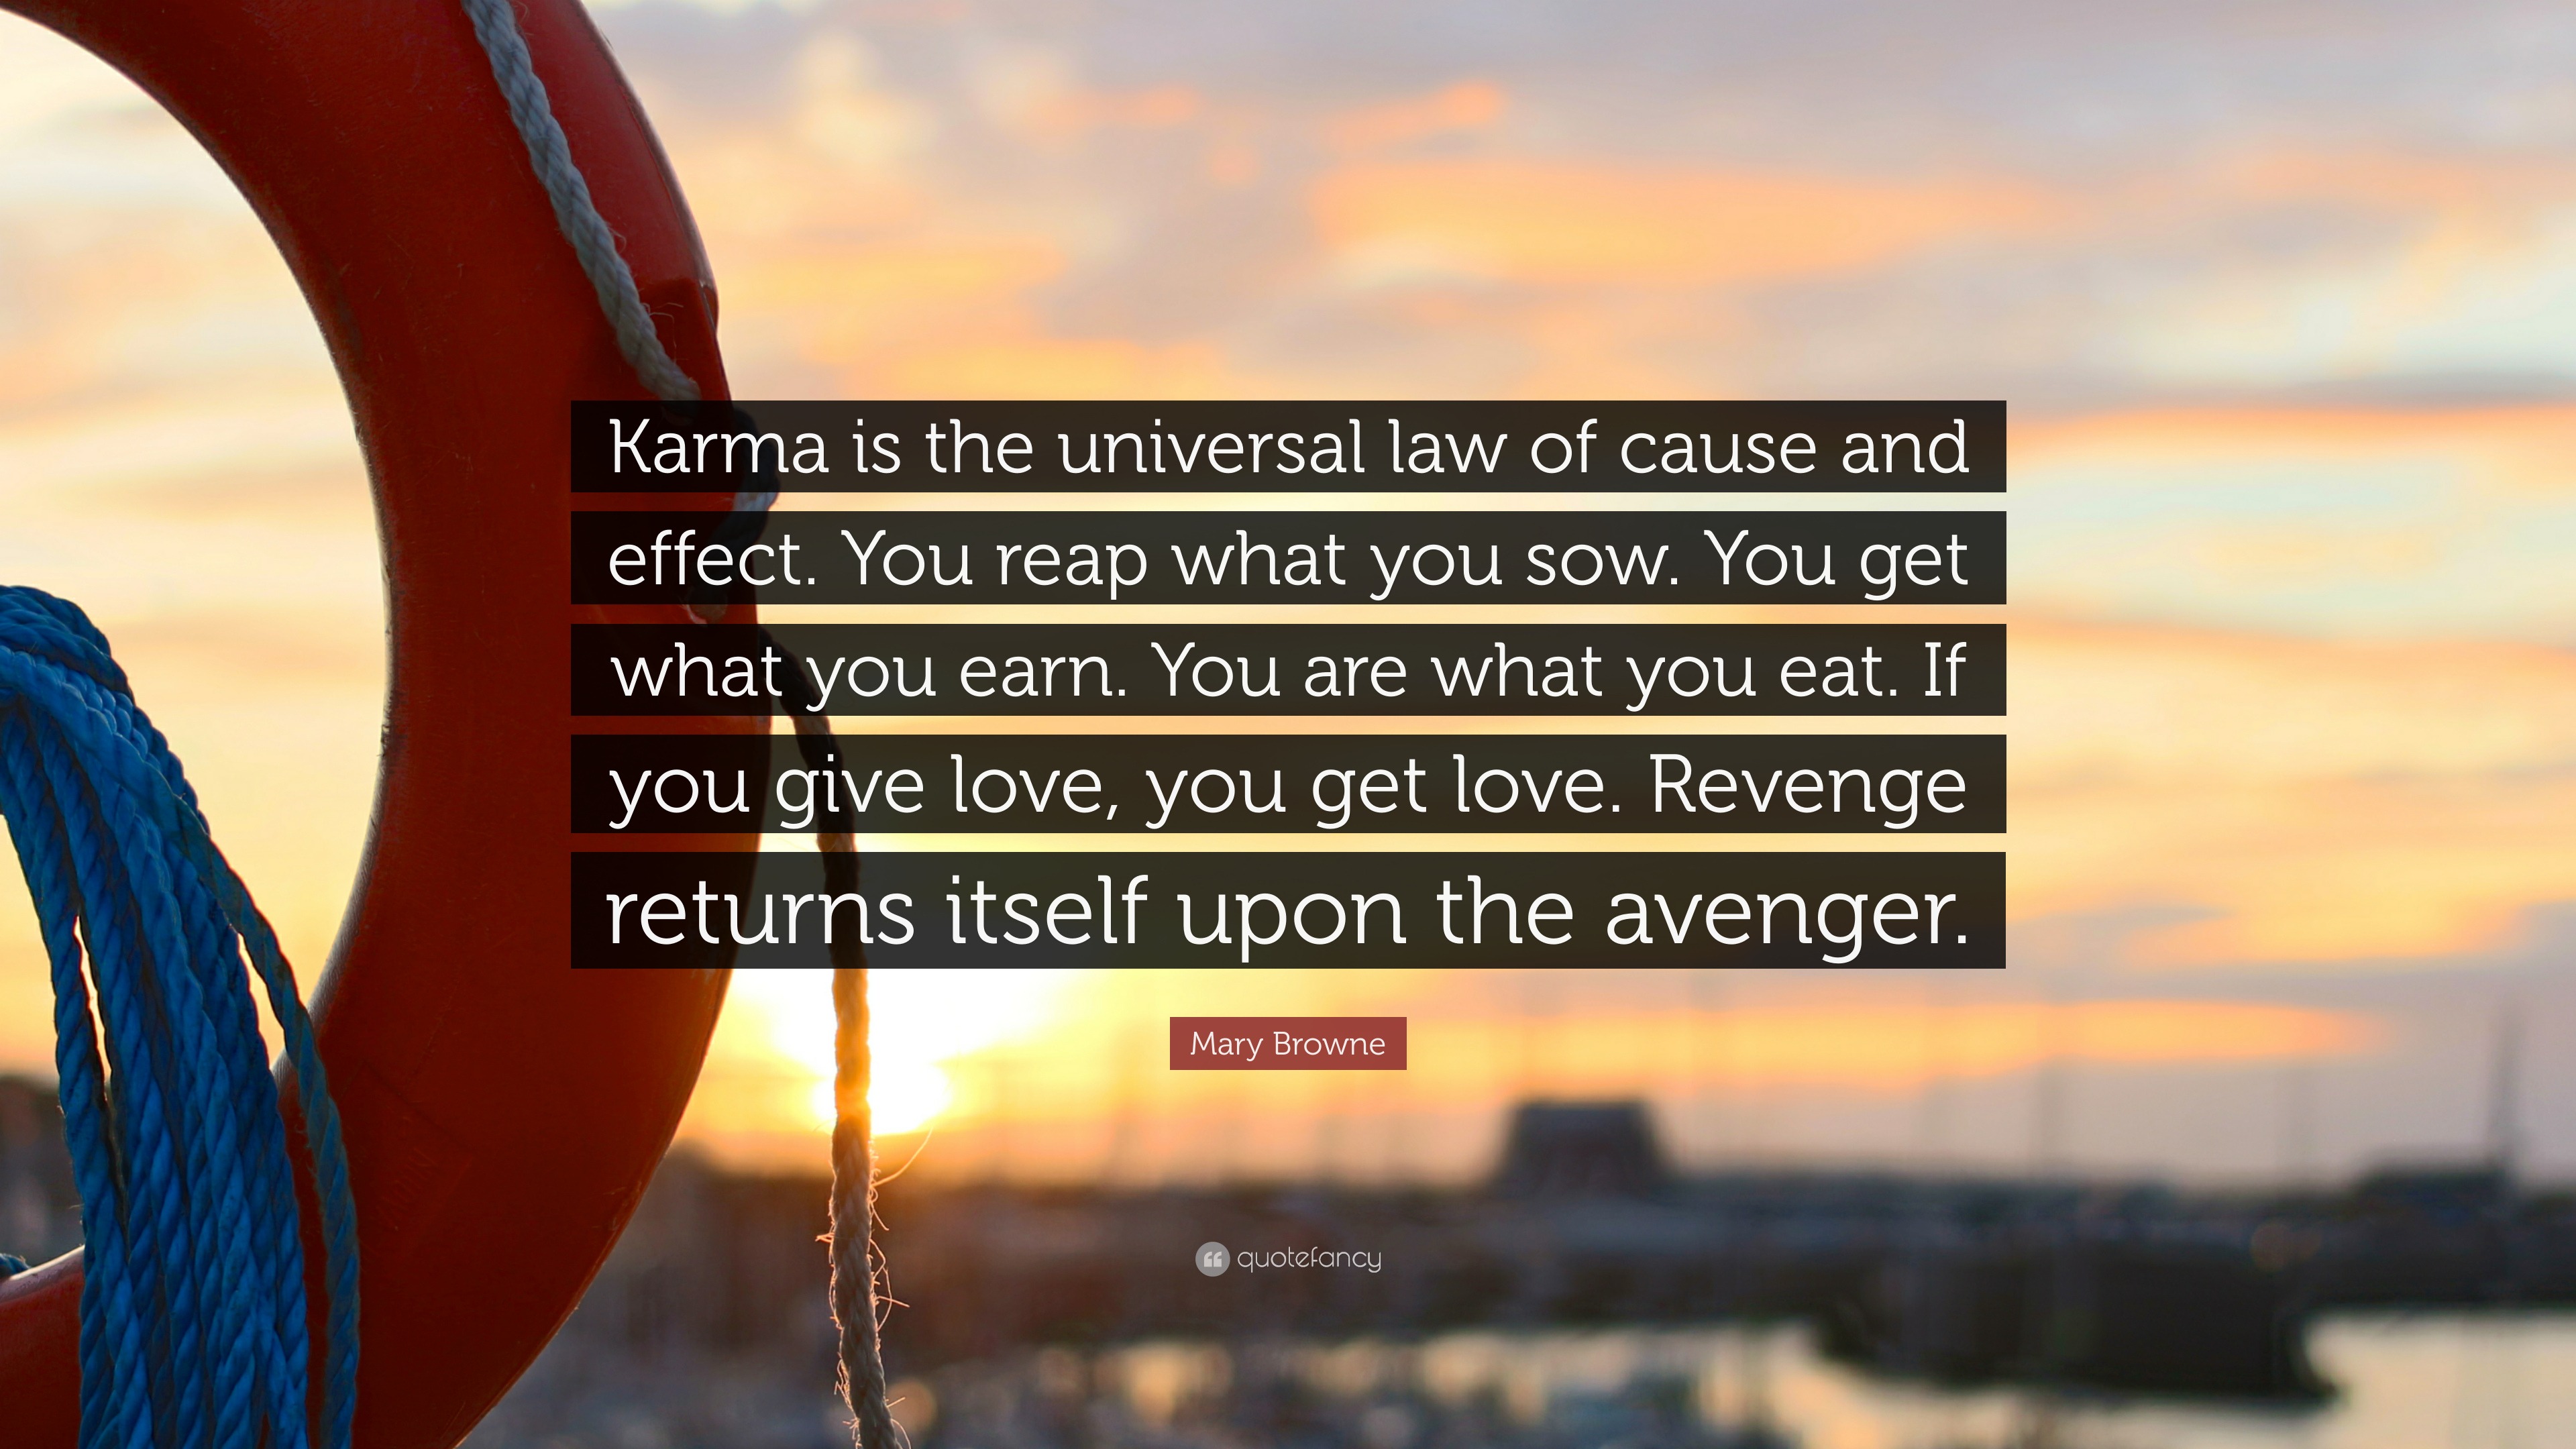 Mary Browne Quote “Karma is the universal law of cause